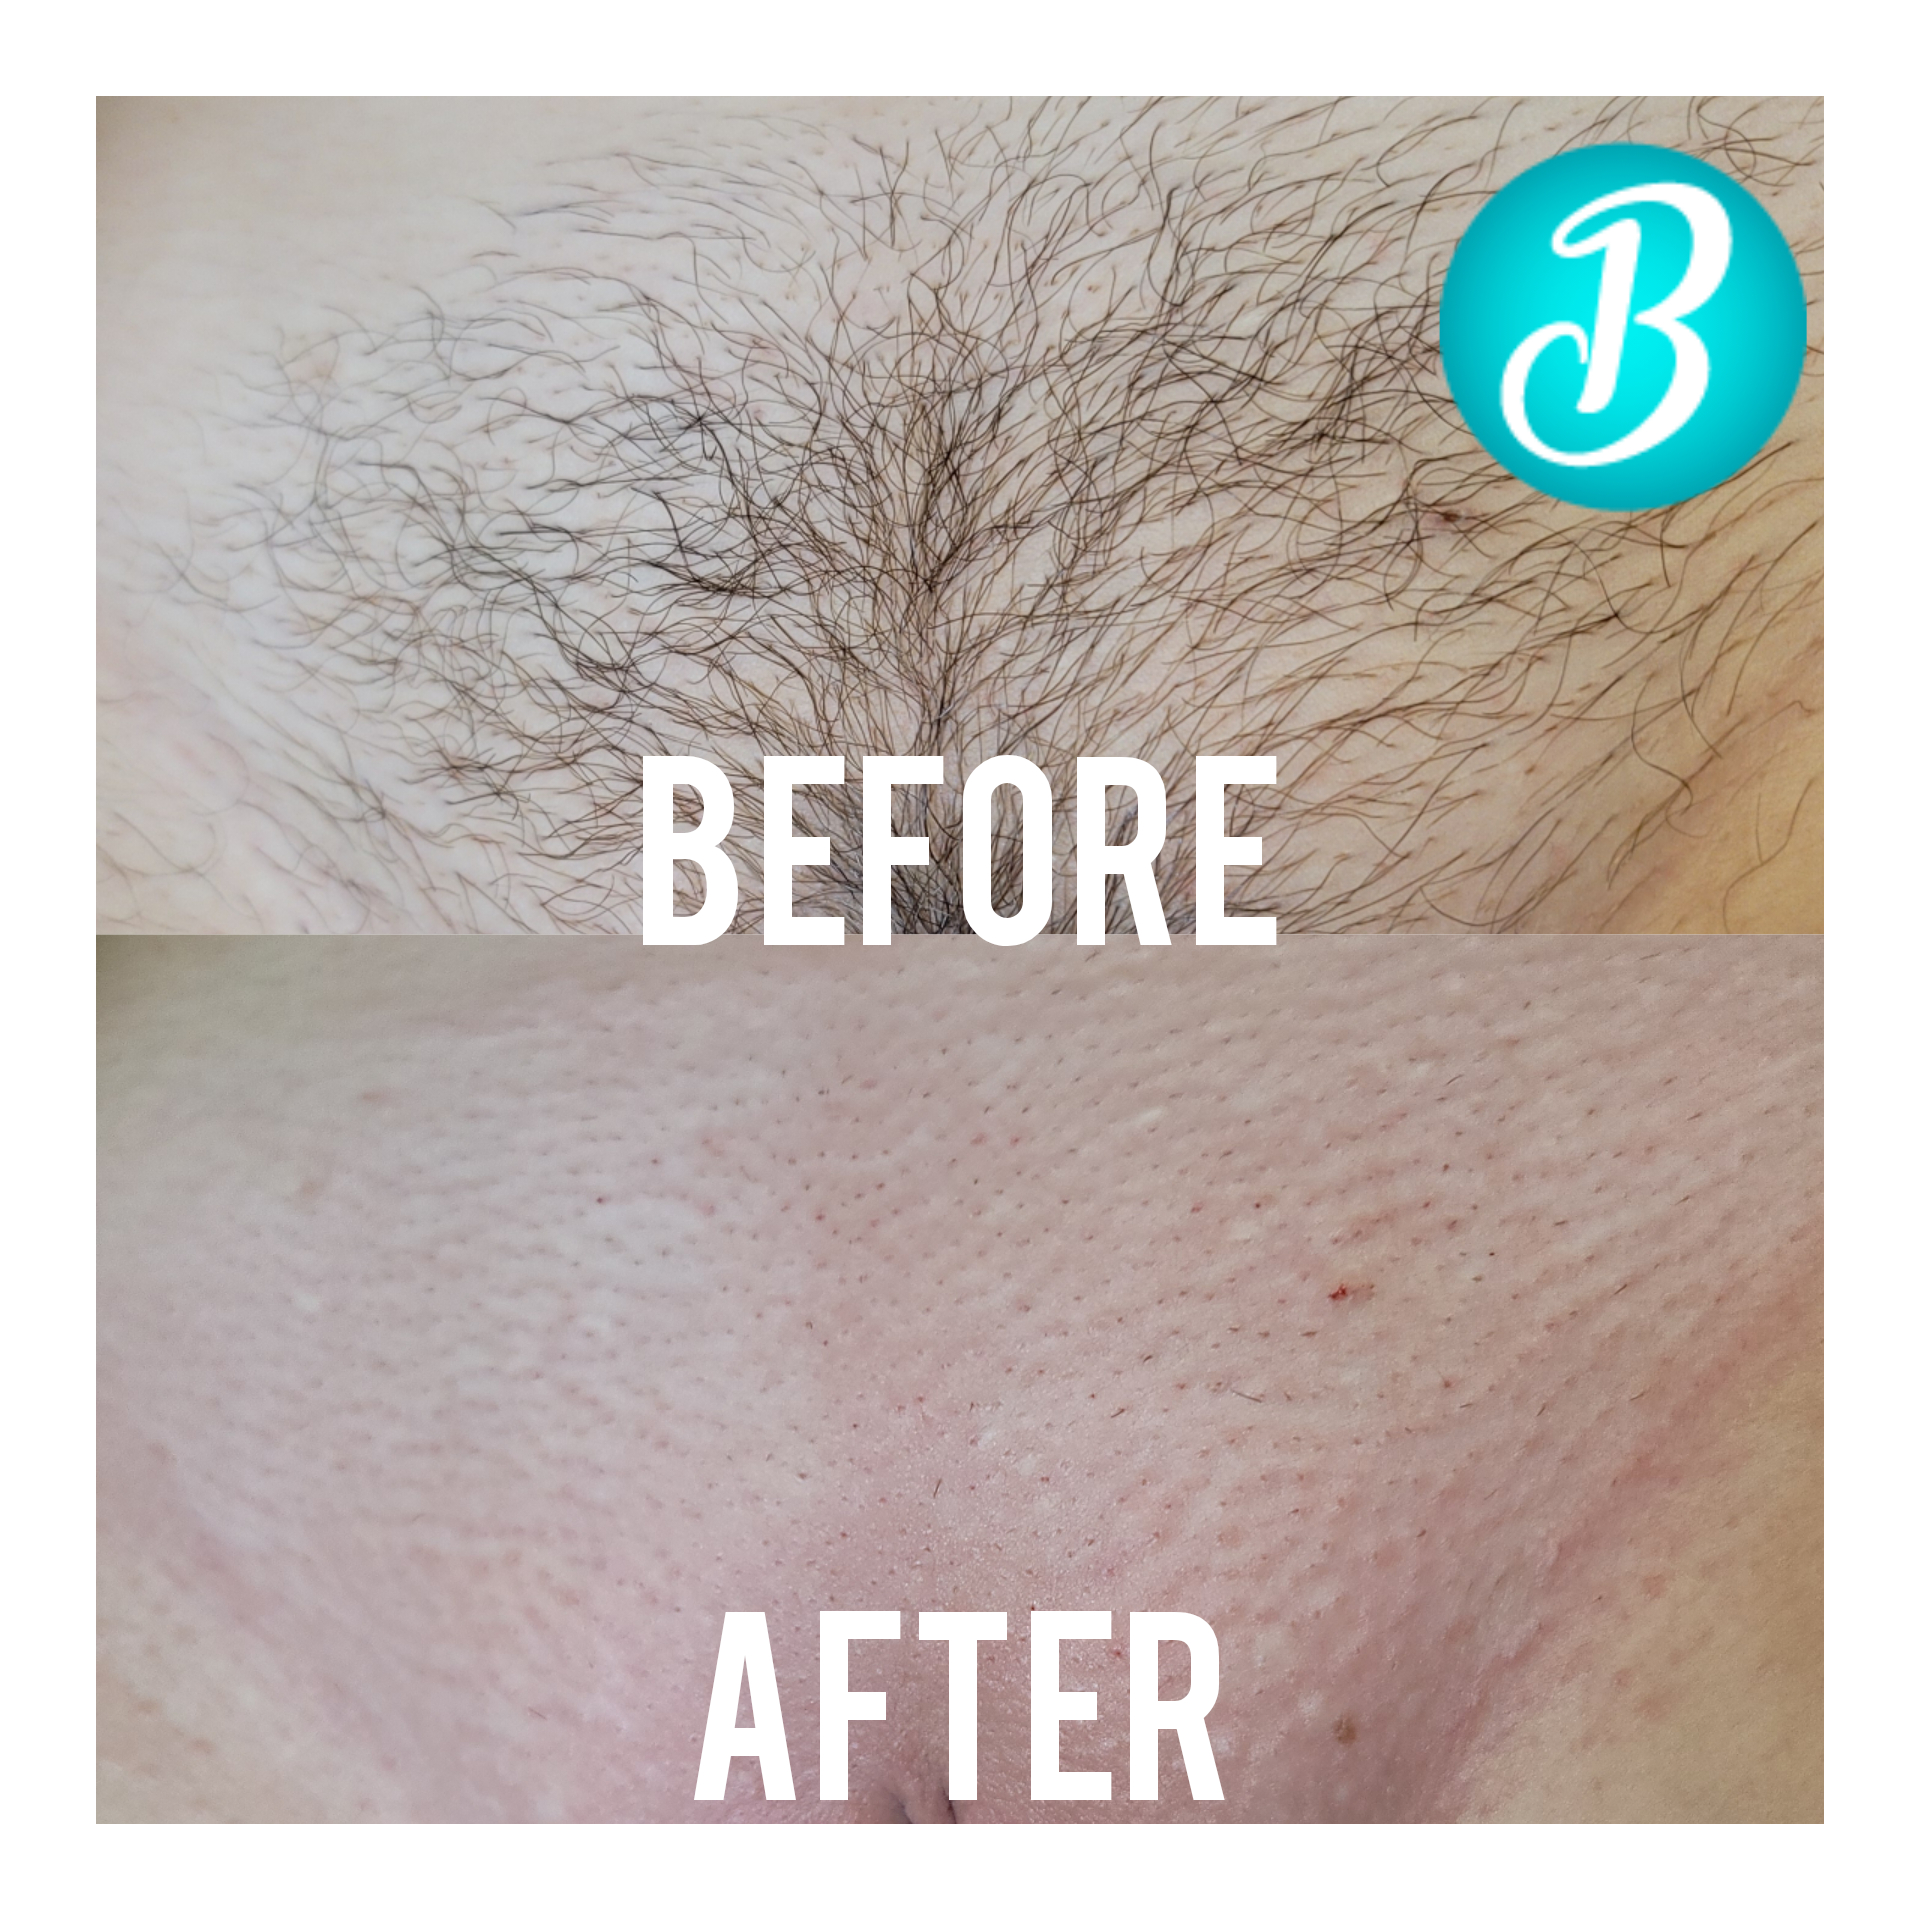 Brazilian Wax Before And After Pictures again mobile